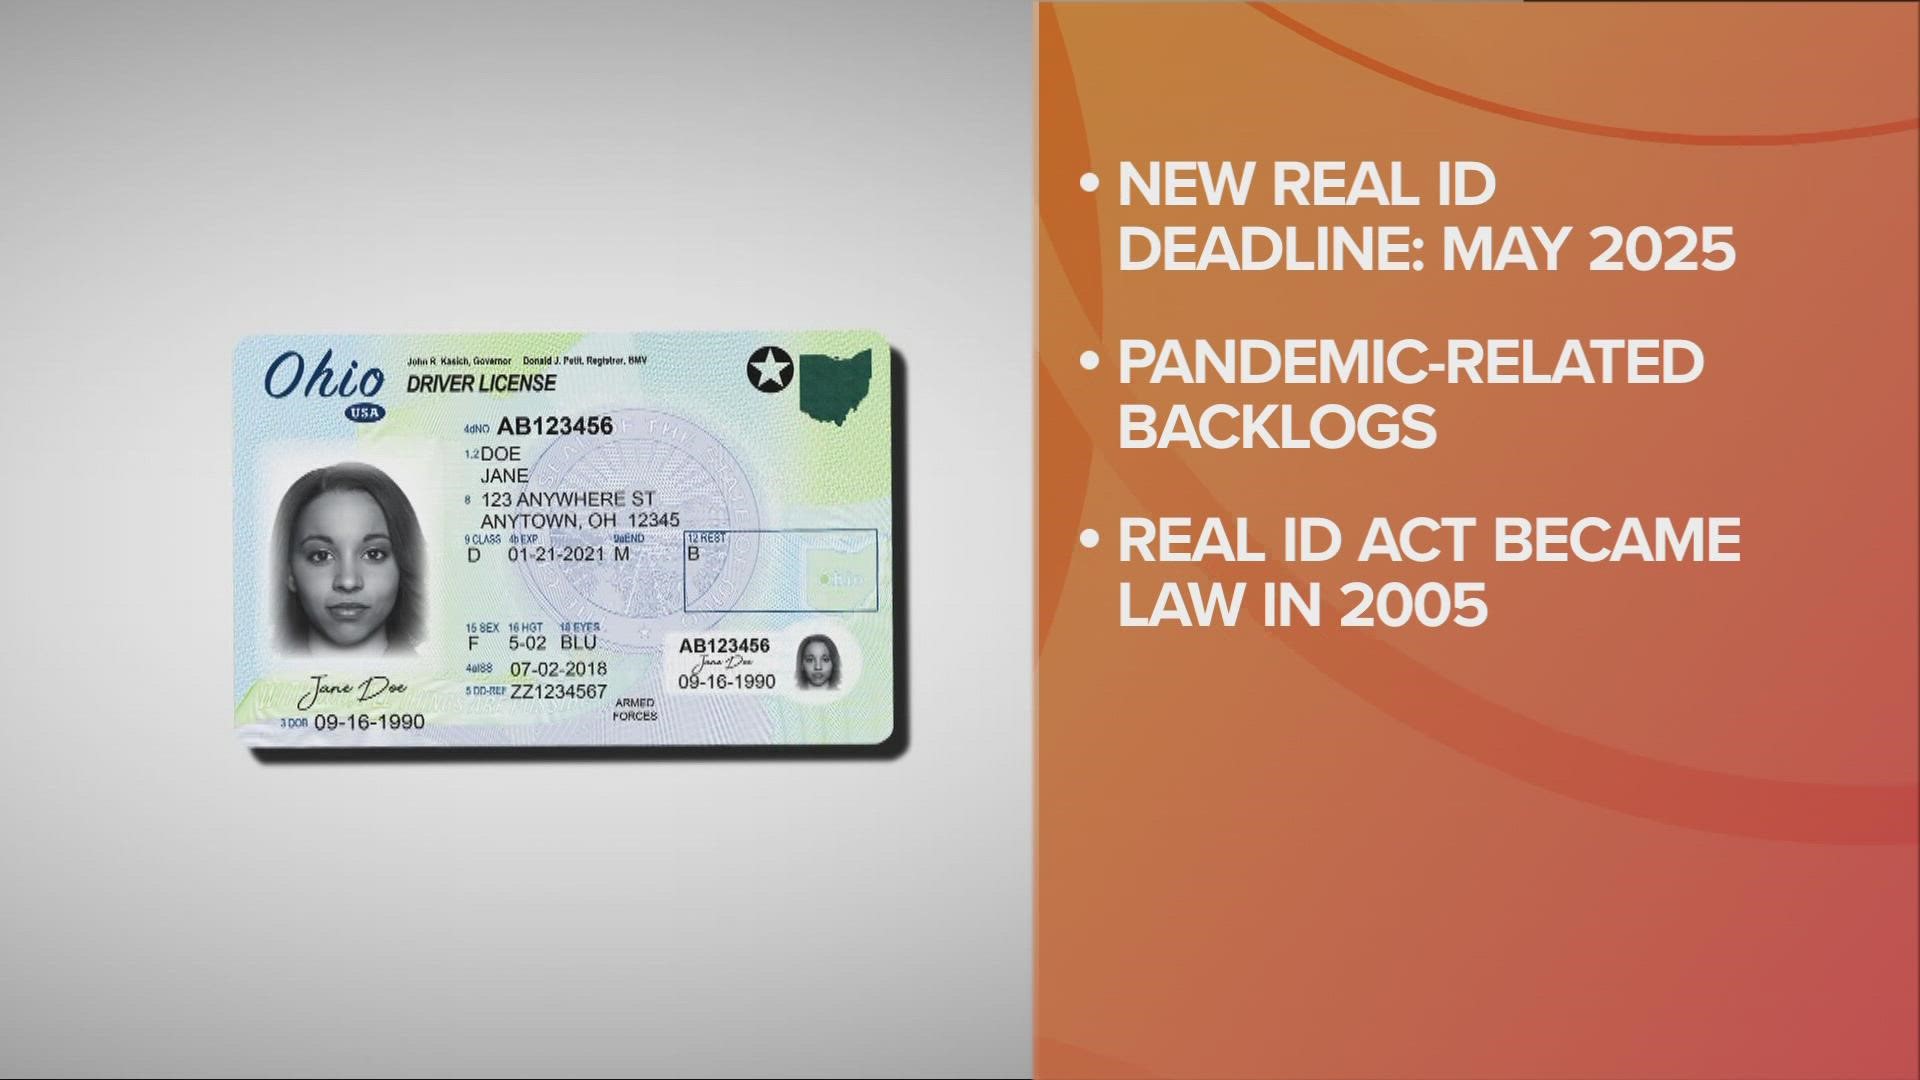 The Department of Homeland Security said pandemic-related backlogs have slowed states' progress in issuing REAL ID compliant driver's licenses.